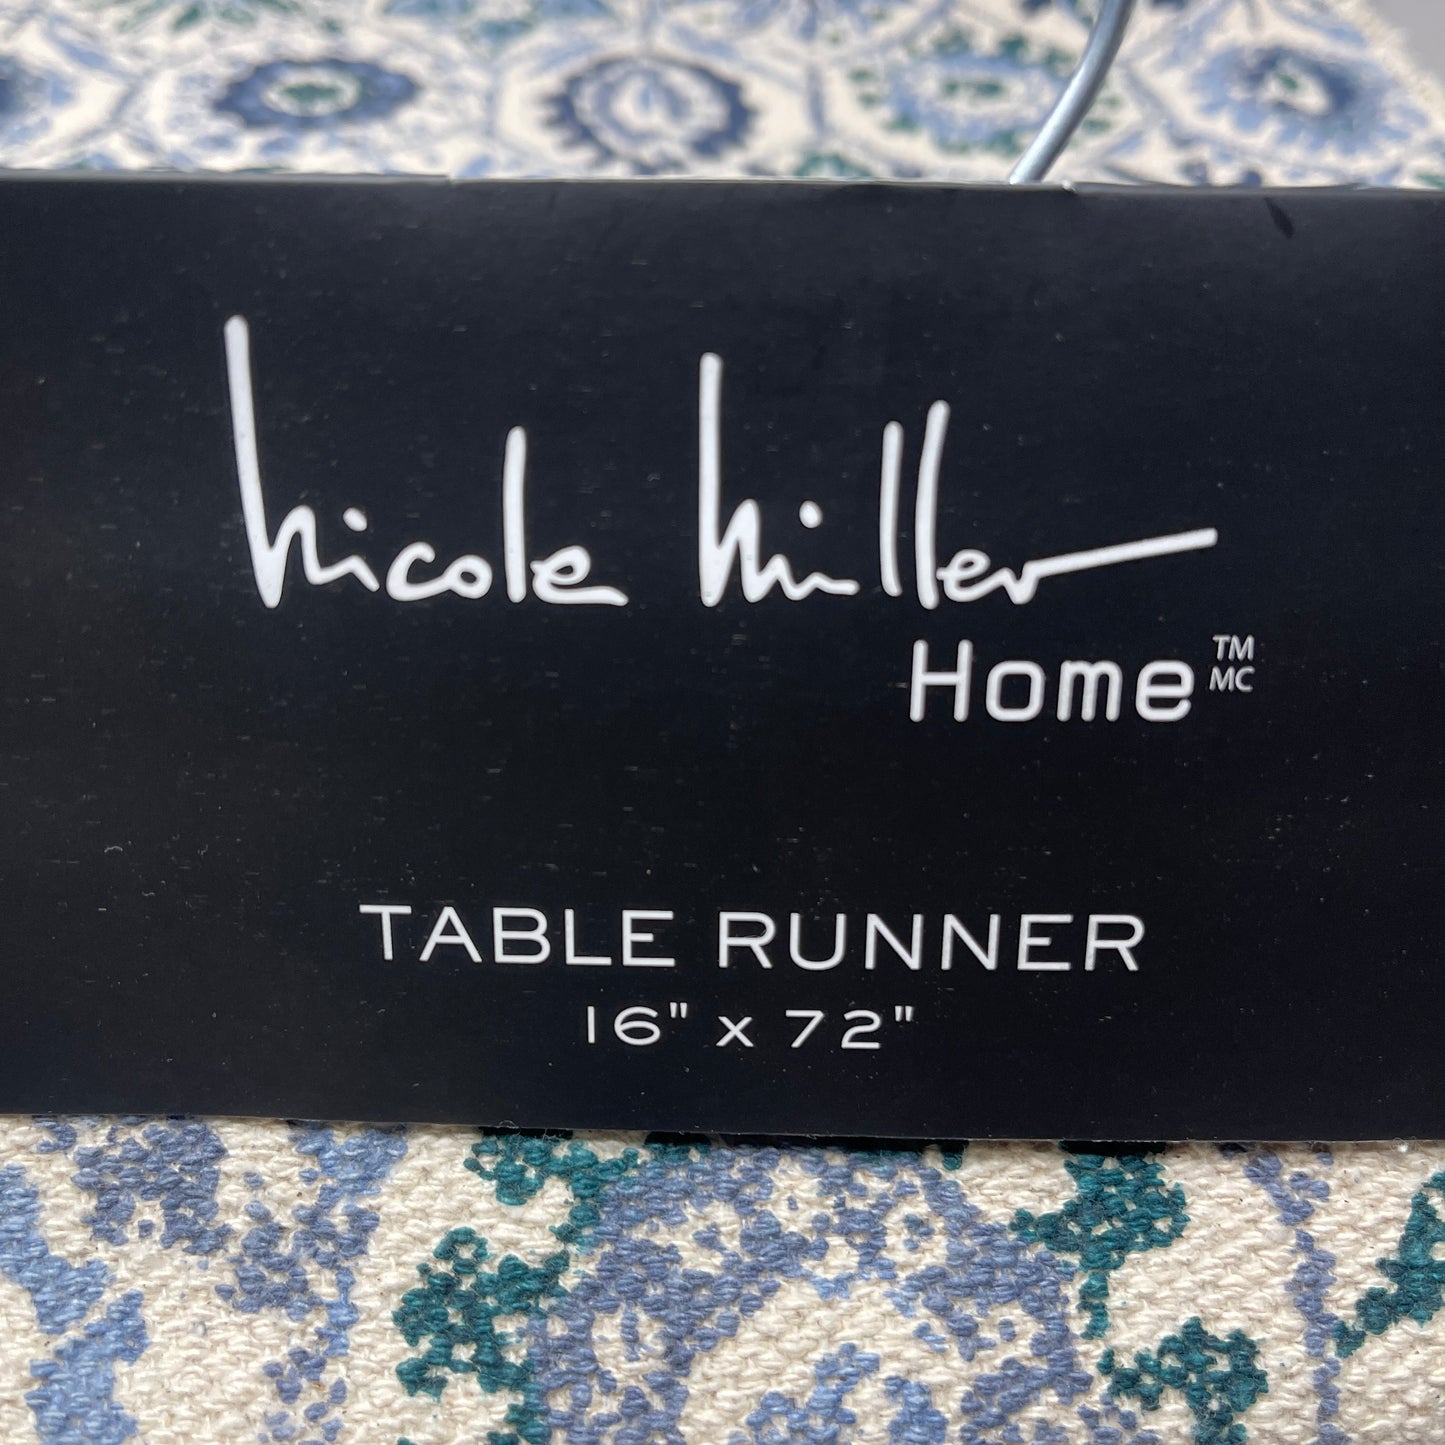 NICOLE MILLER HOME Table Runner 16" x 72" (6 ft) Floral 100% Cotton 502522 (New)